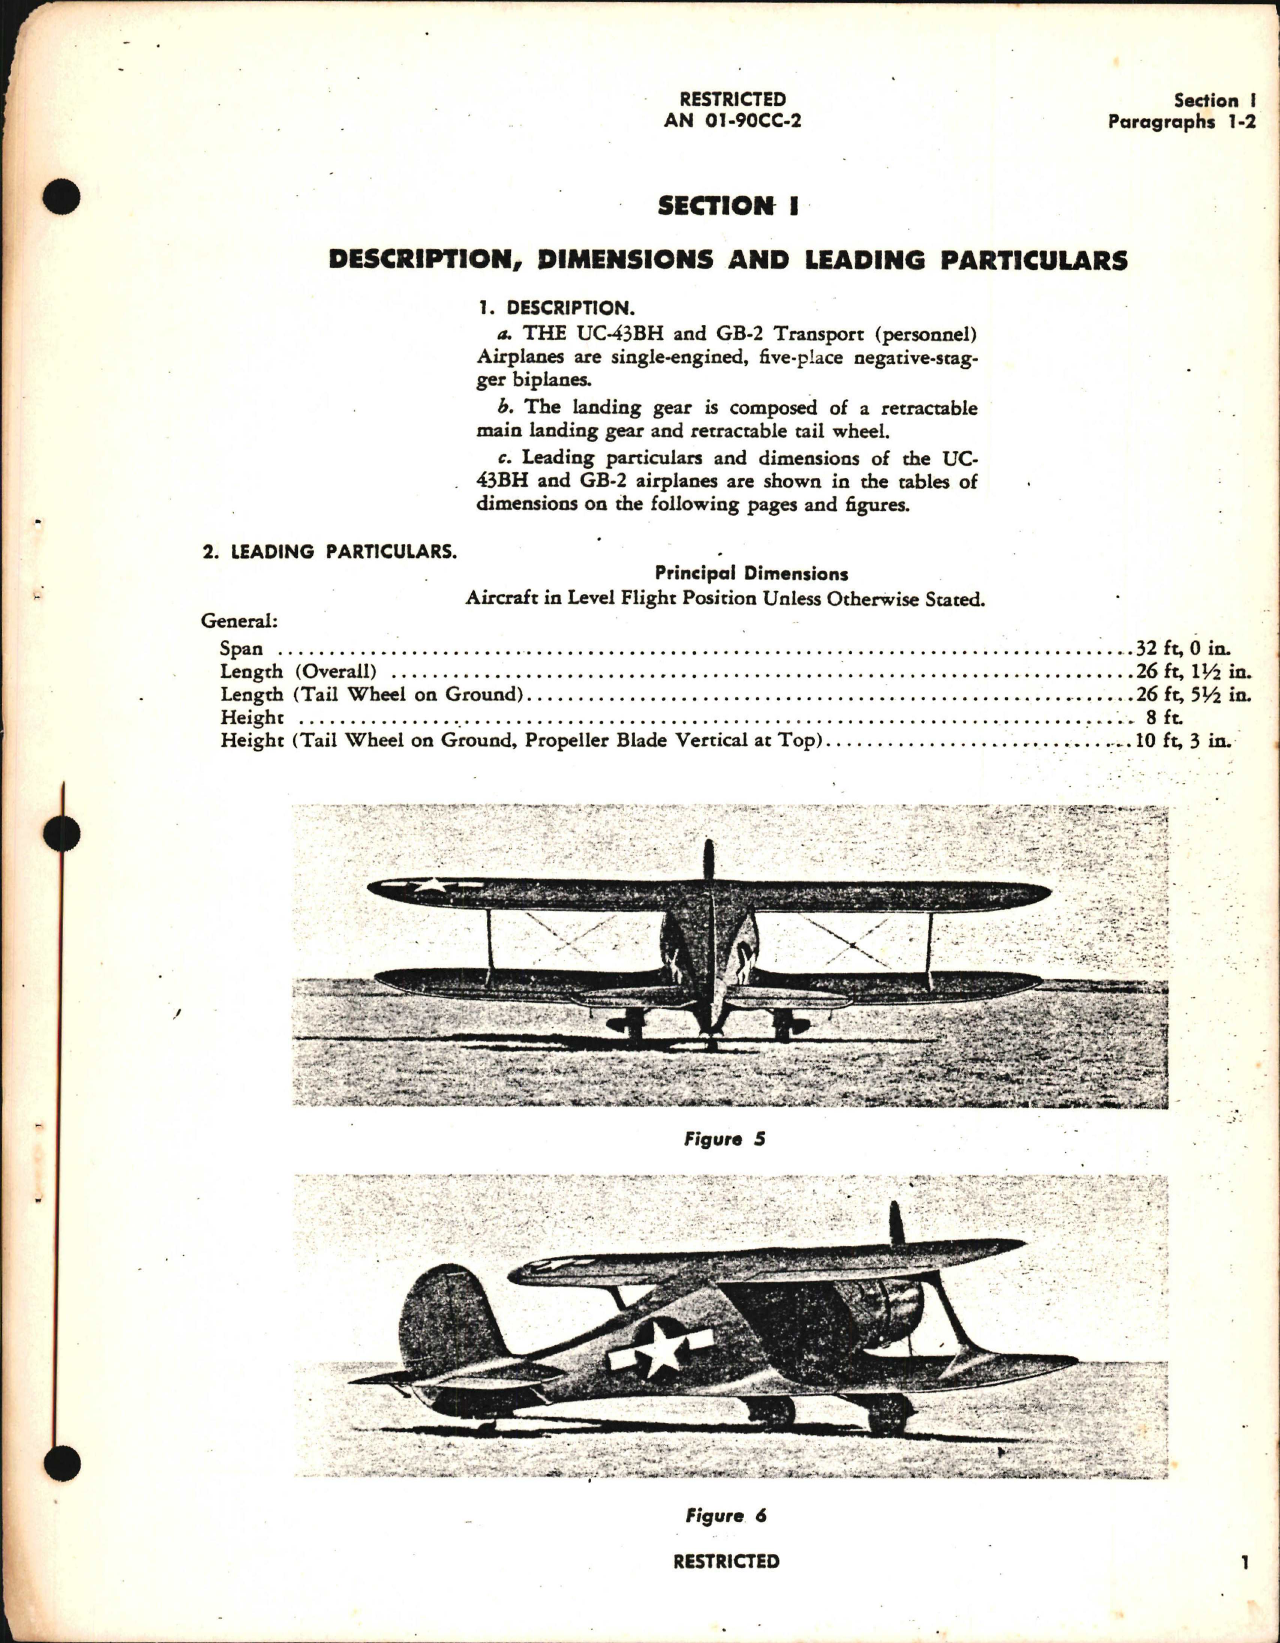 Sample page 5 from AirCorps Library document: Erection and Maintenance Instructions for UC-43, GB-2, and D17S